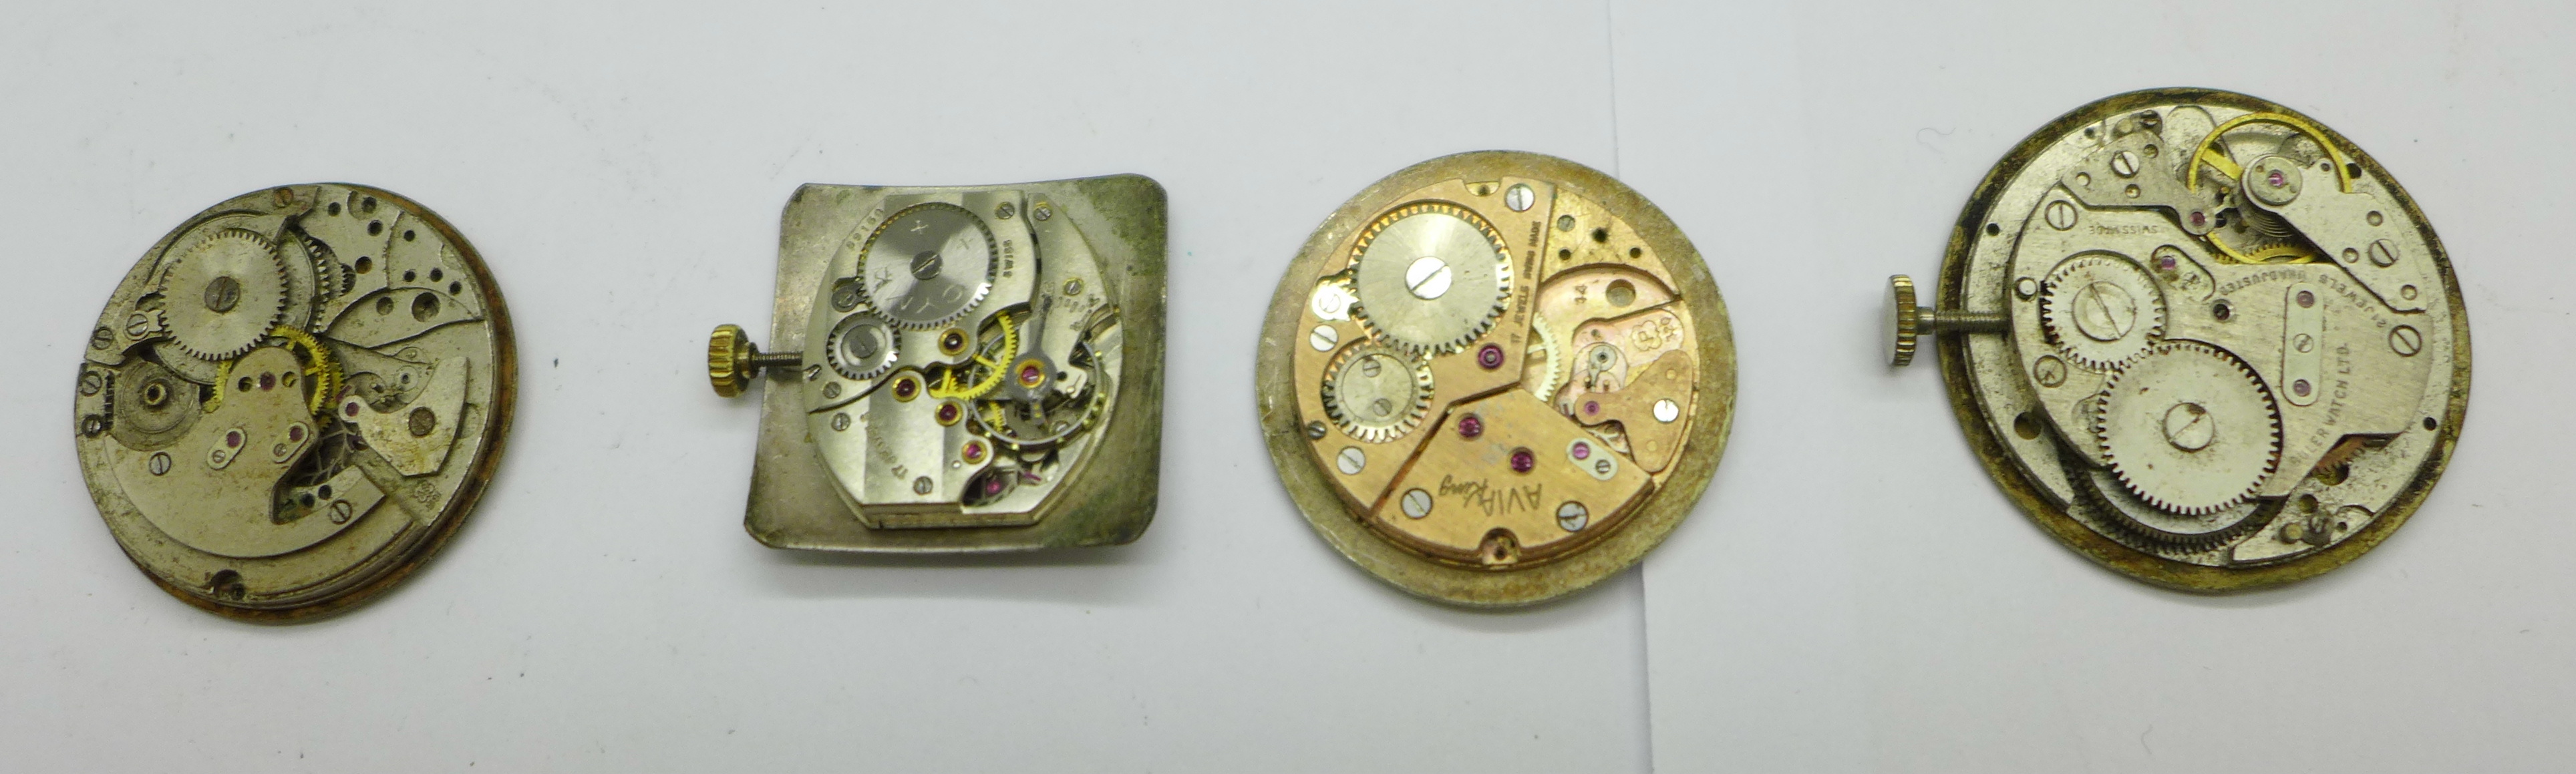 Four wristwatch movements; Buler, Bentley, Invicta and Cyma, a/f - Image 10 of 11